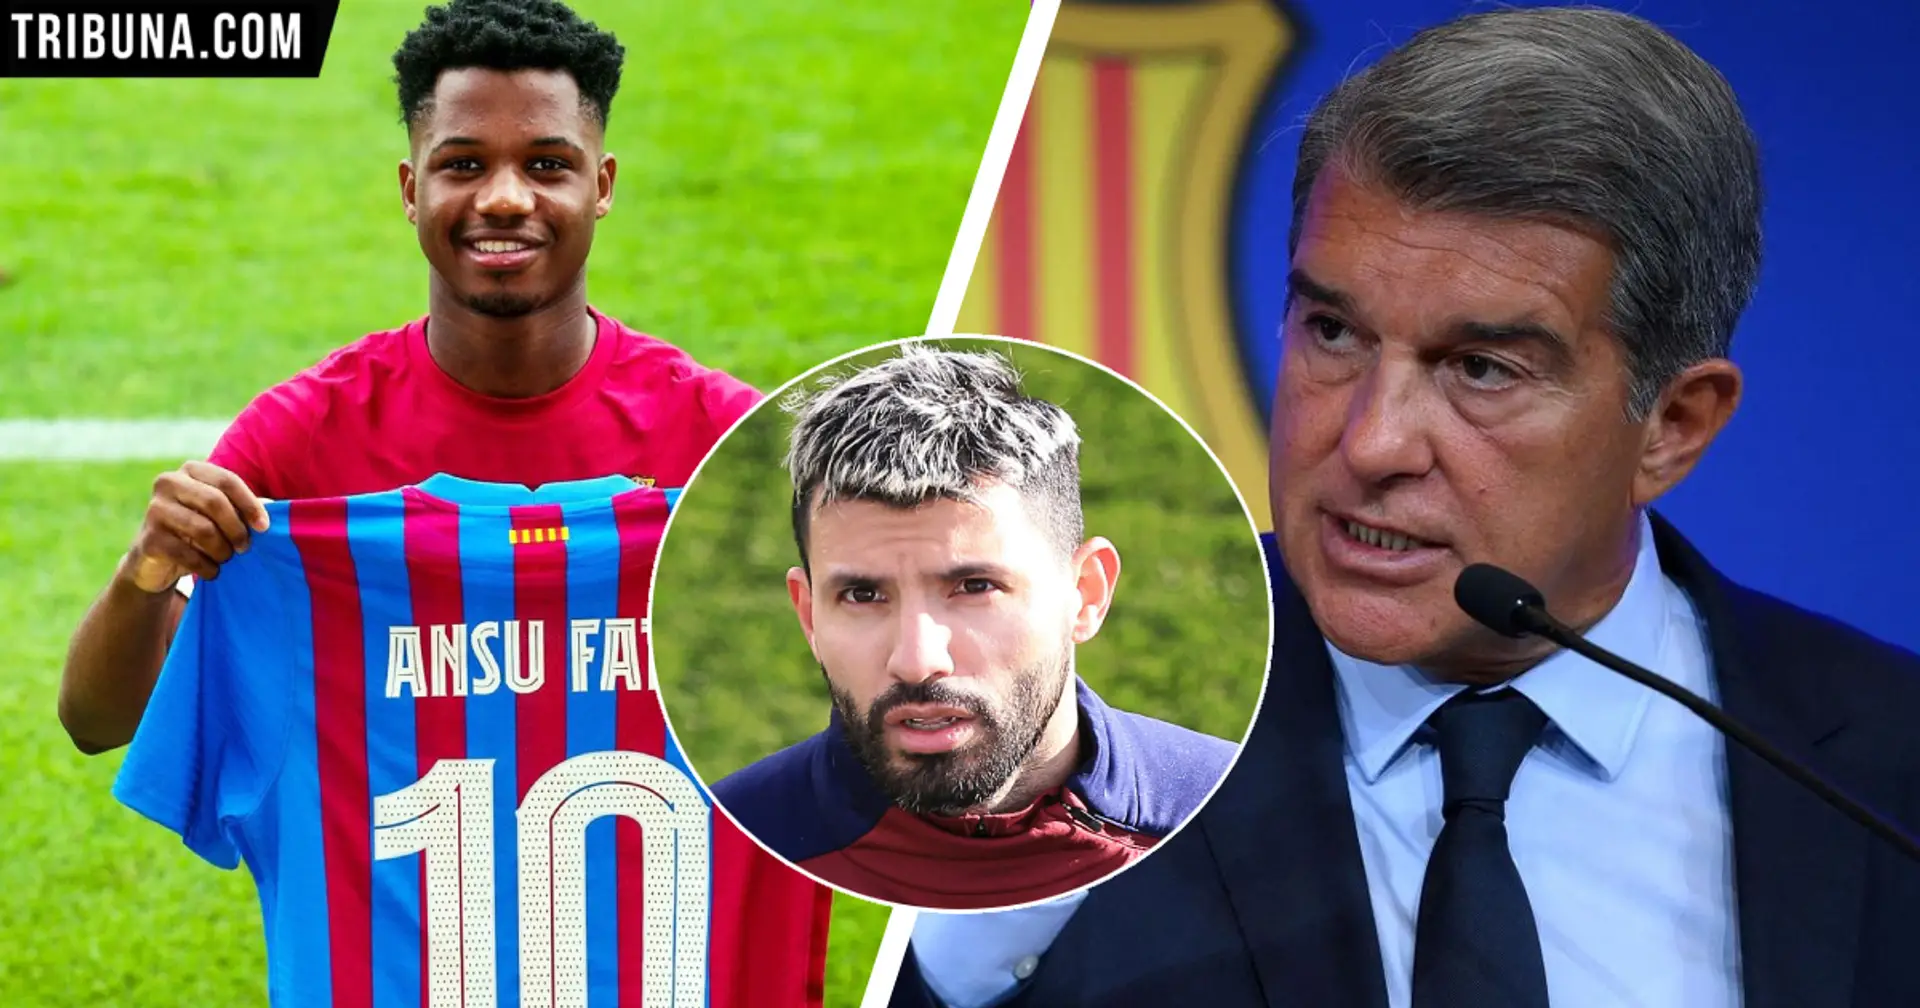 Bigwigs at Barca reportedly preferred No. 10 with Aguero, Laporta insisted on Fati